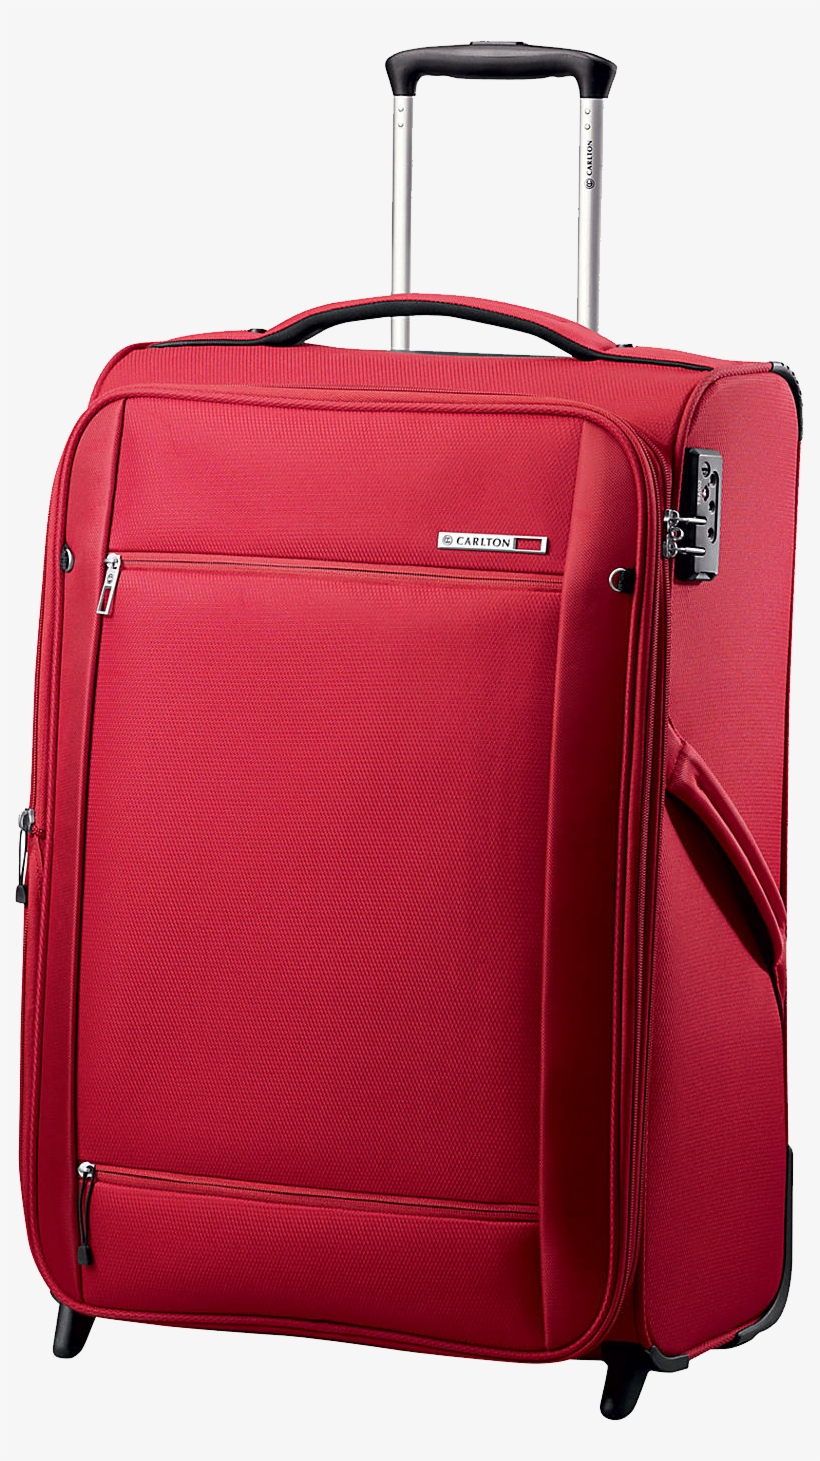 Red Suitcase Png Image - Suitcase Png, transparent png #726256